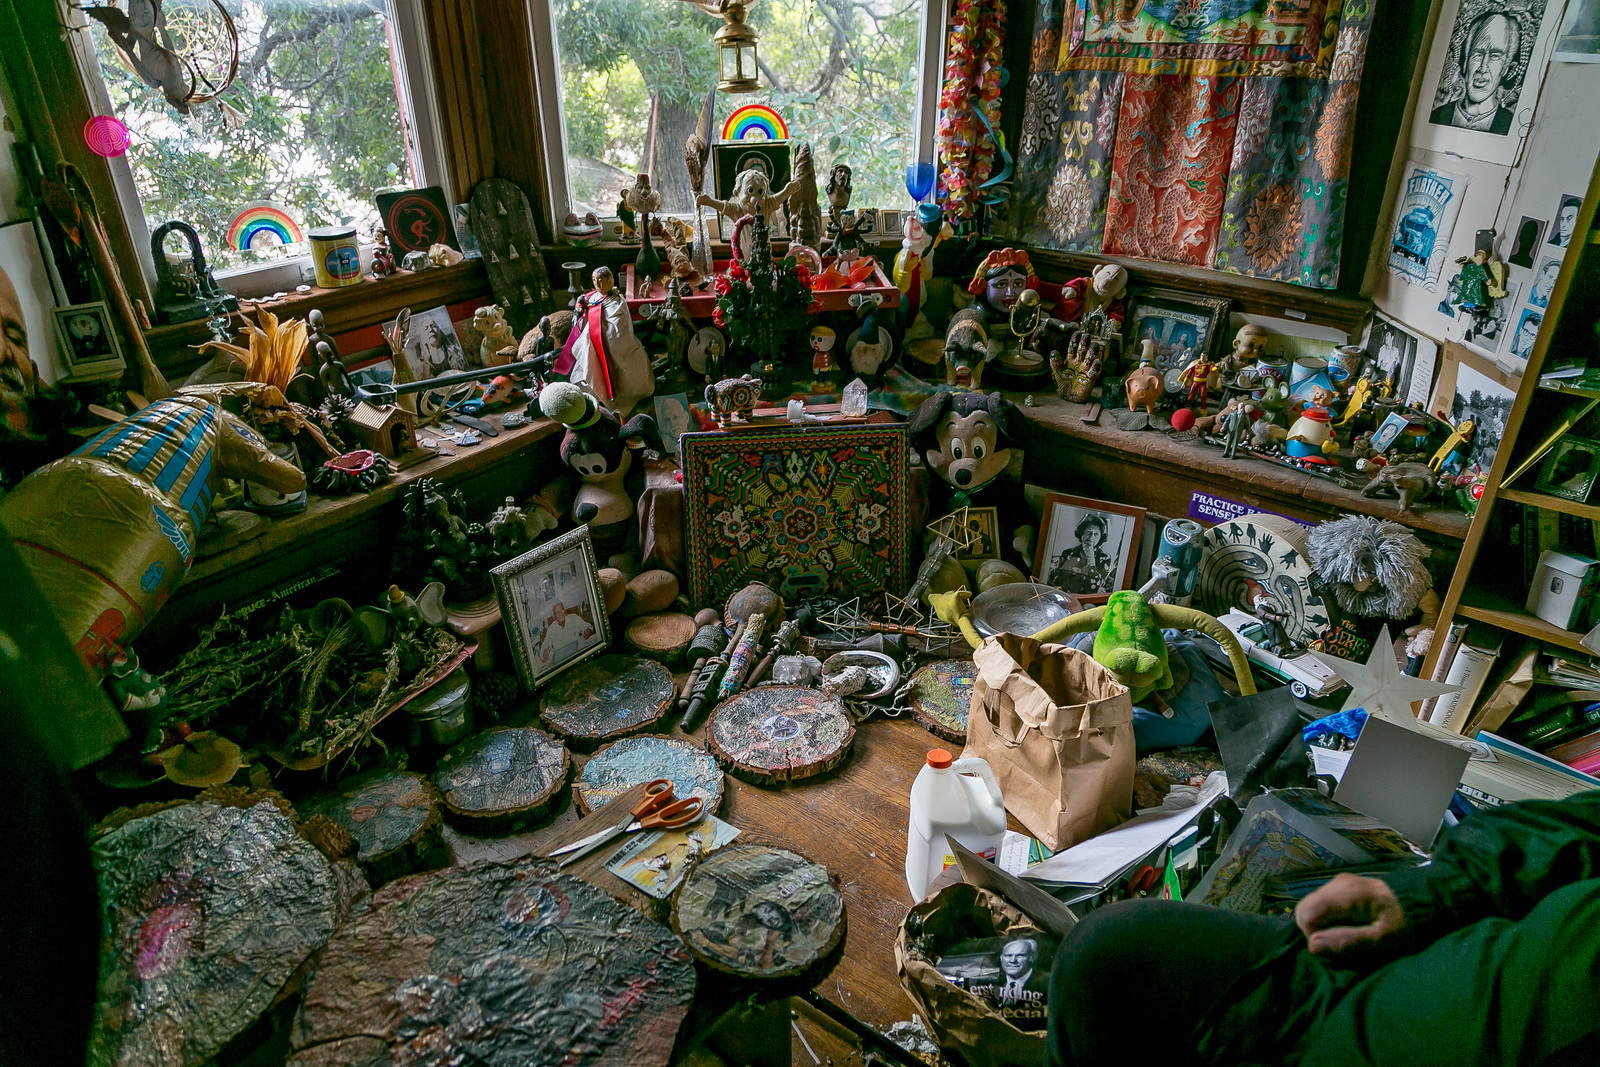 Quirky Berkeley | The Quirky Material Culture of Berkeley